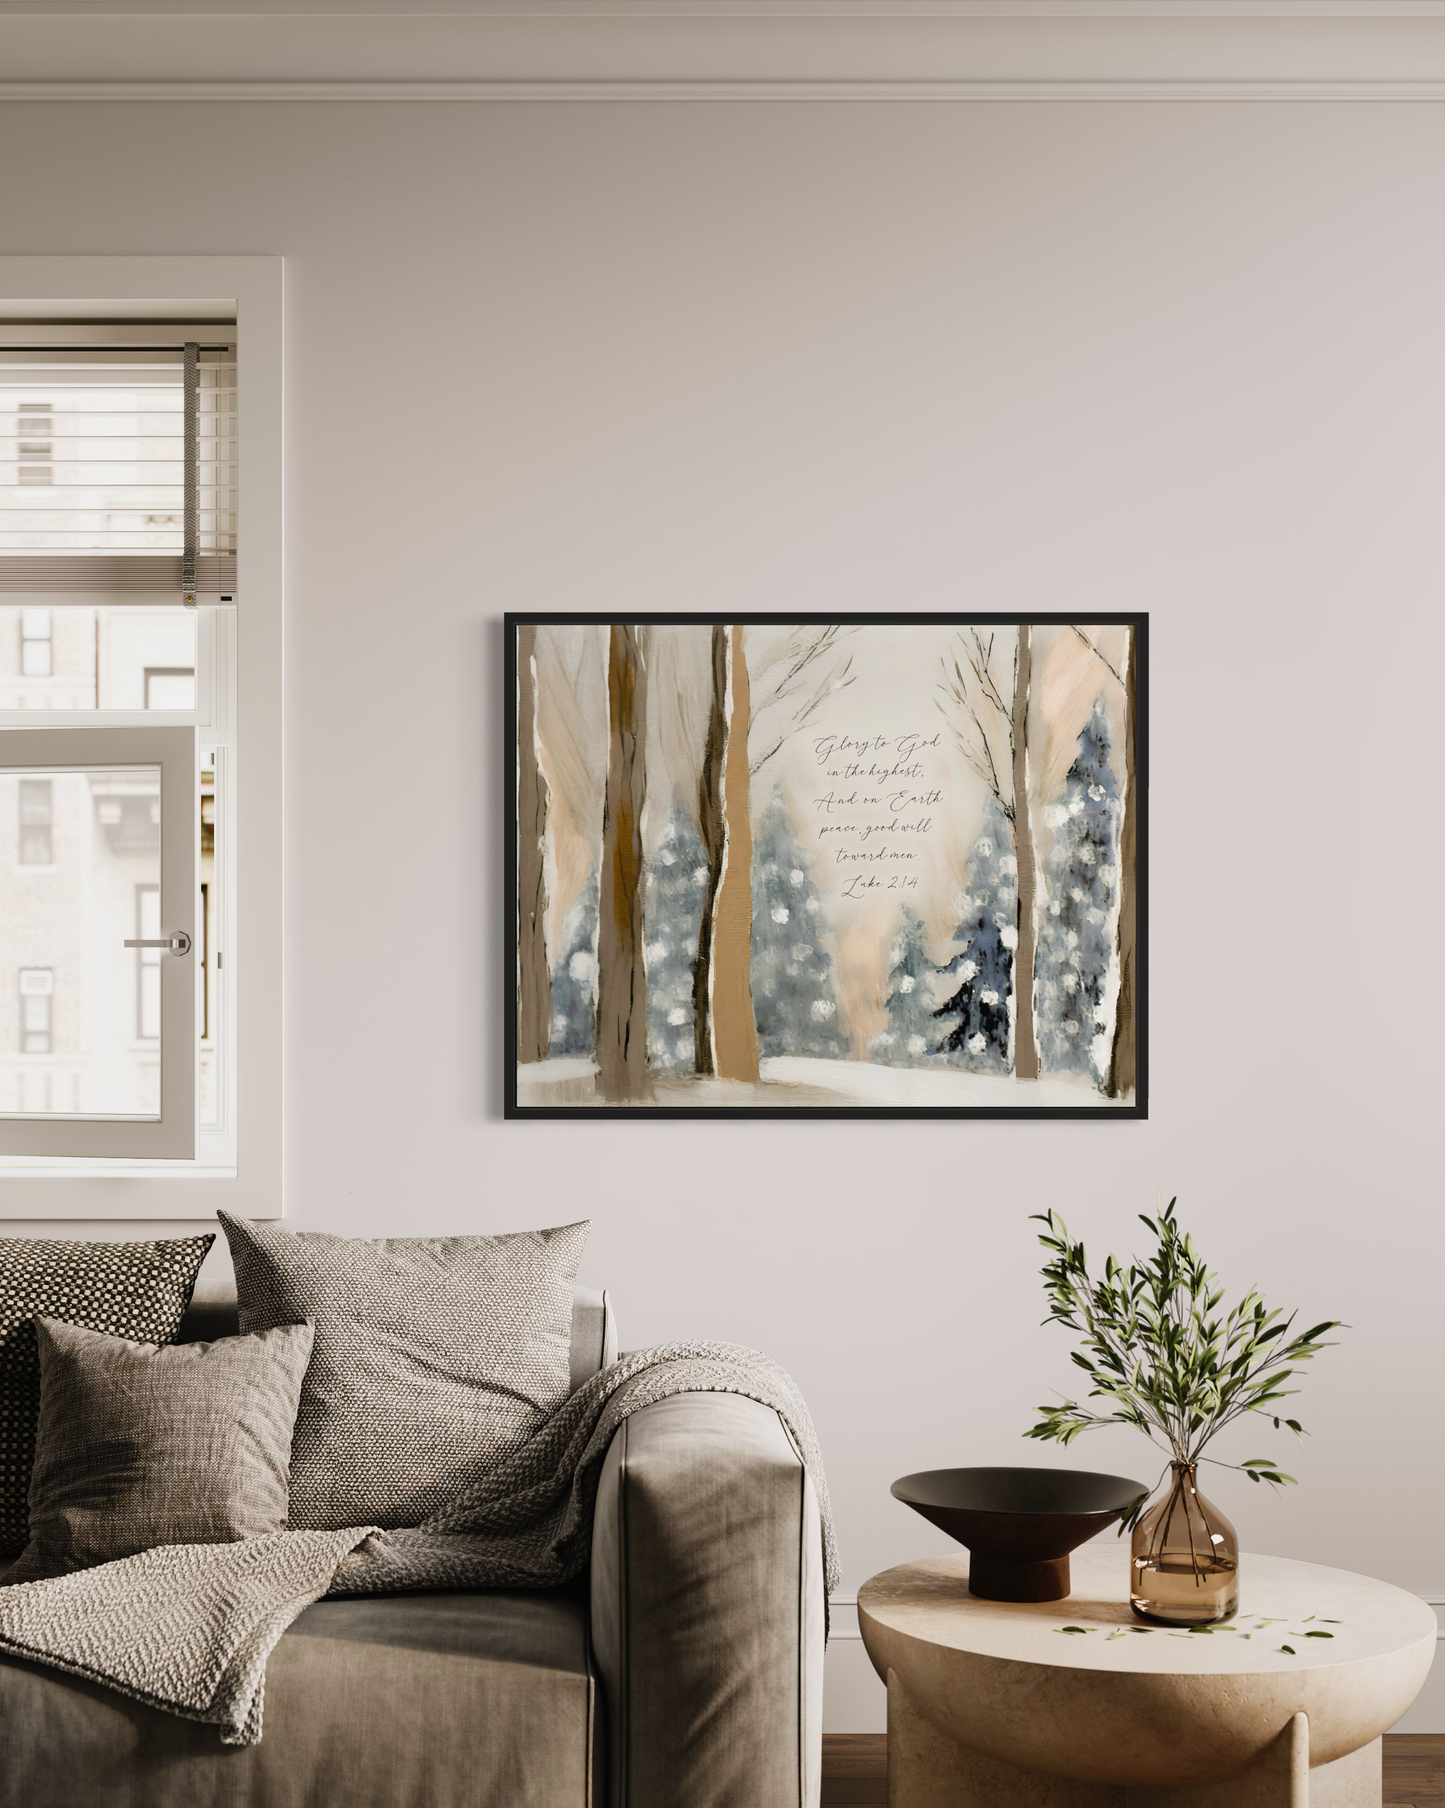 Glory To God in the Highest, Christmas | Christian Canvas Wall Art